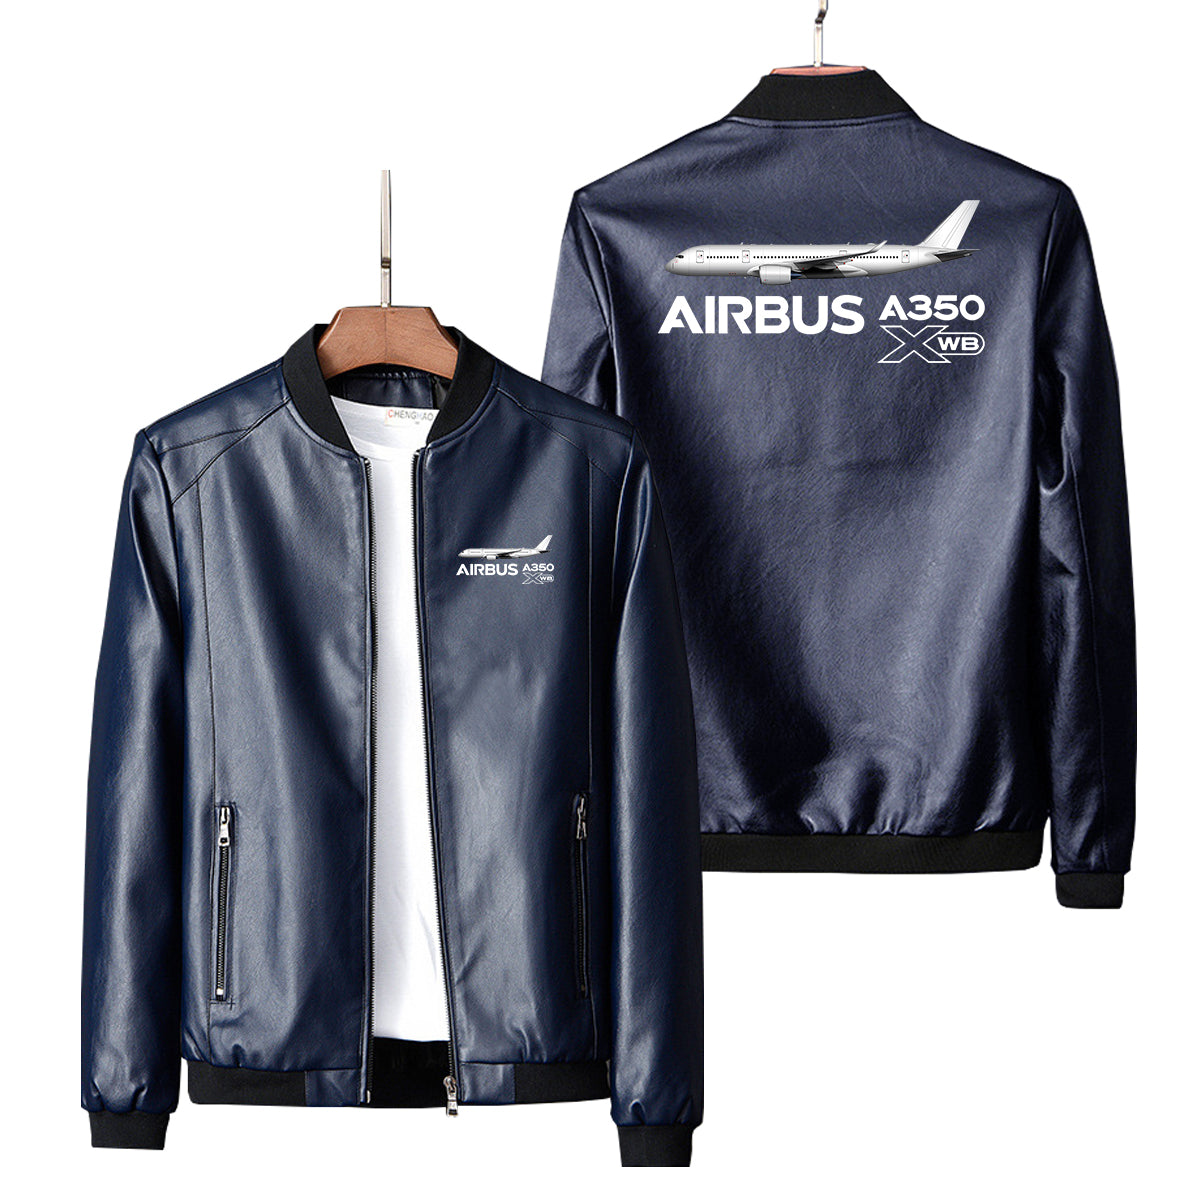 The Airbus A350 WXB Designed PU Leather Jackets